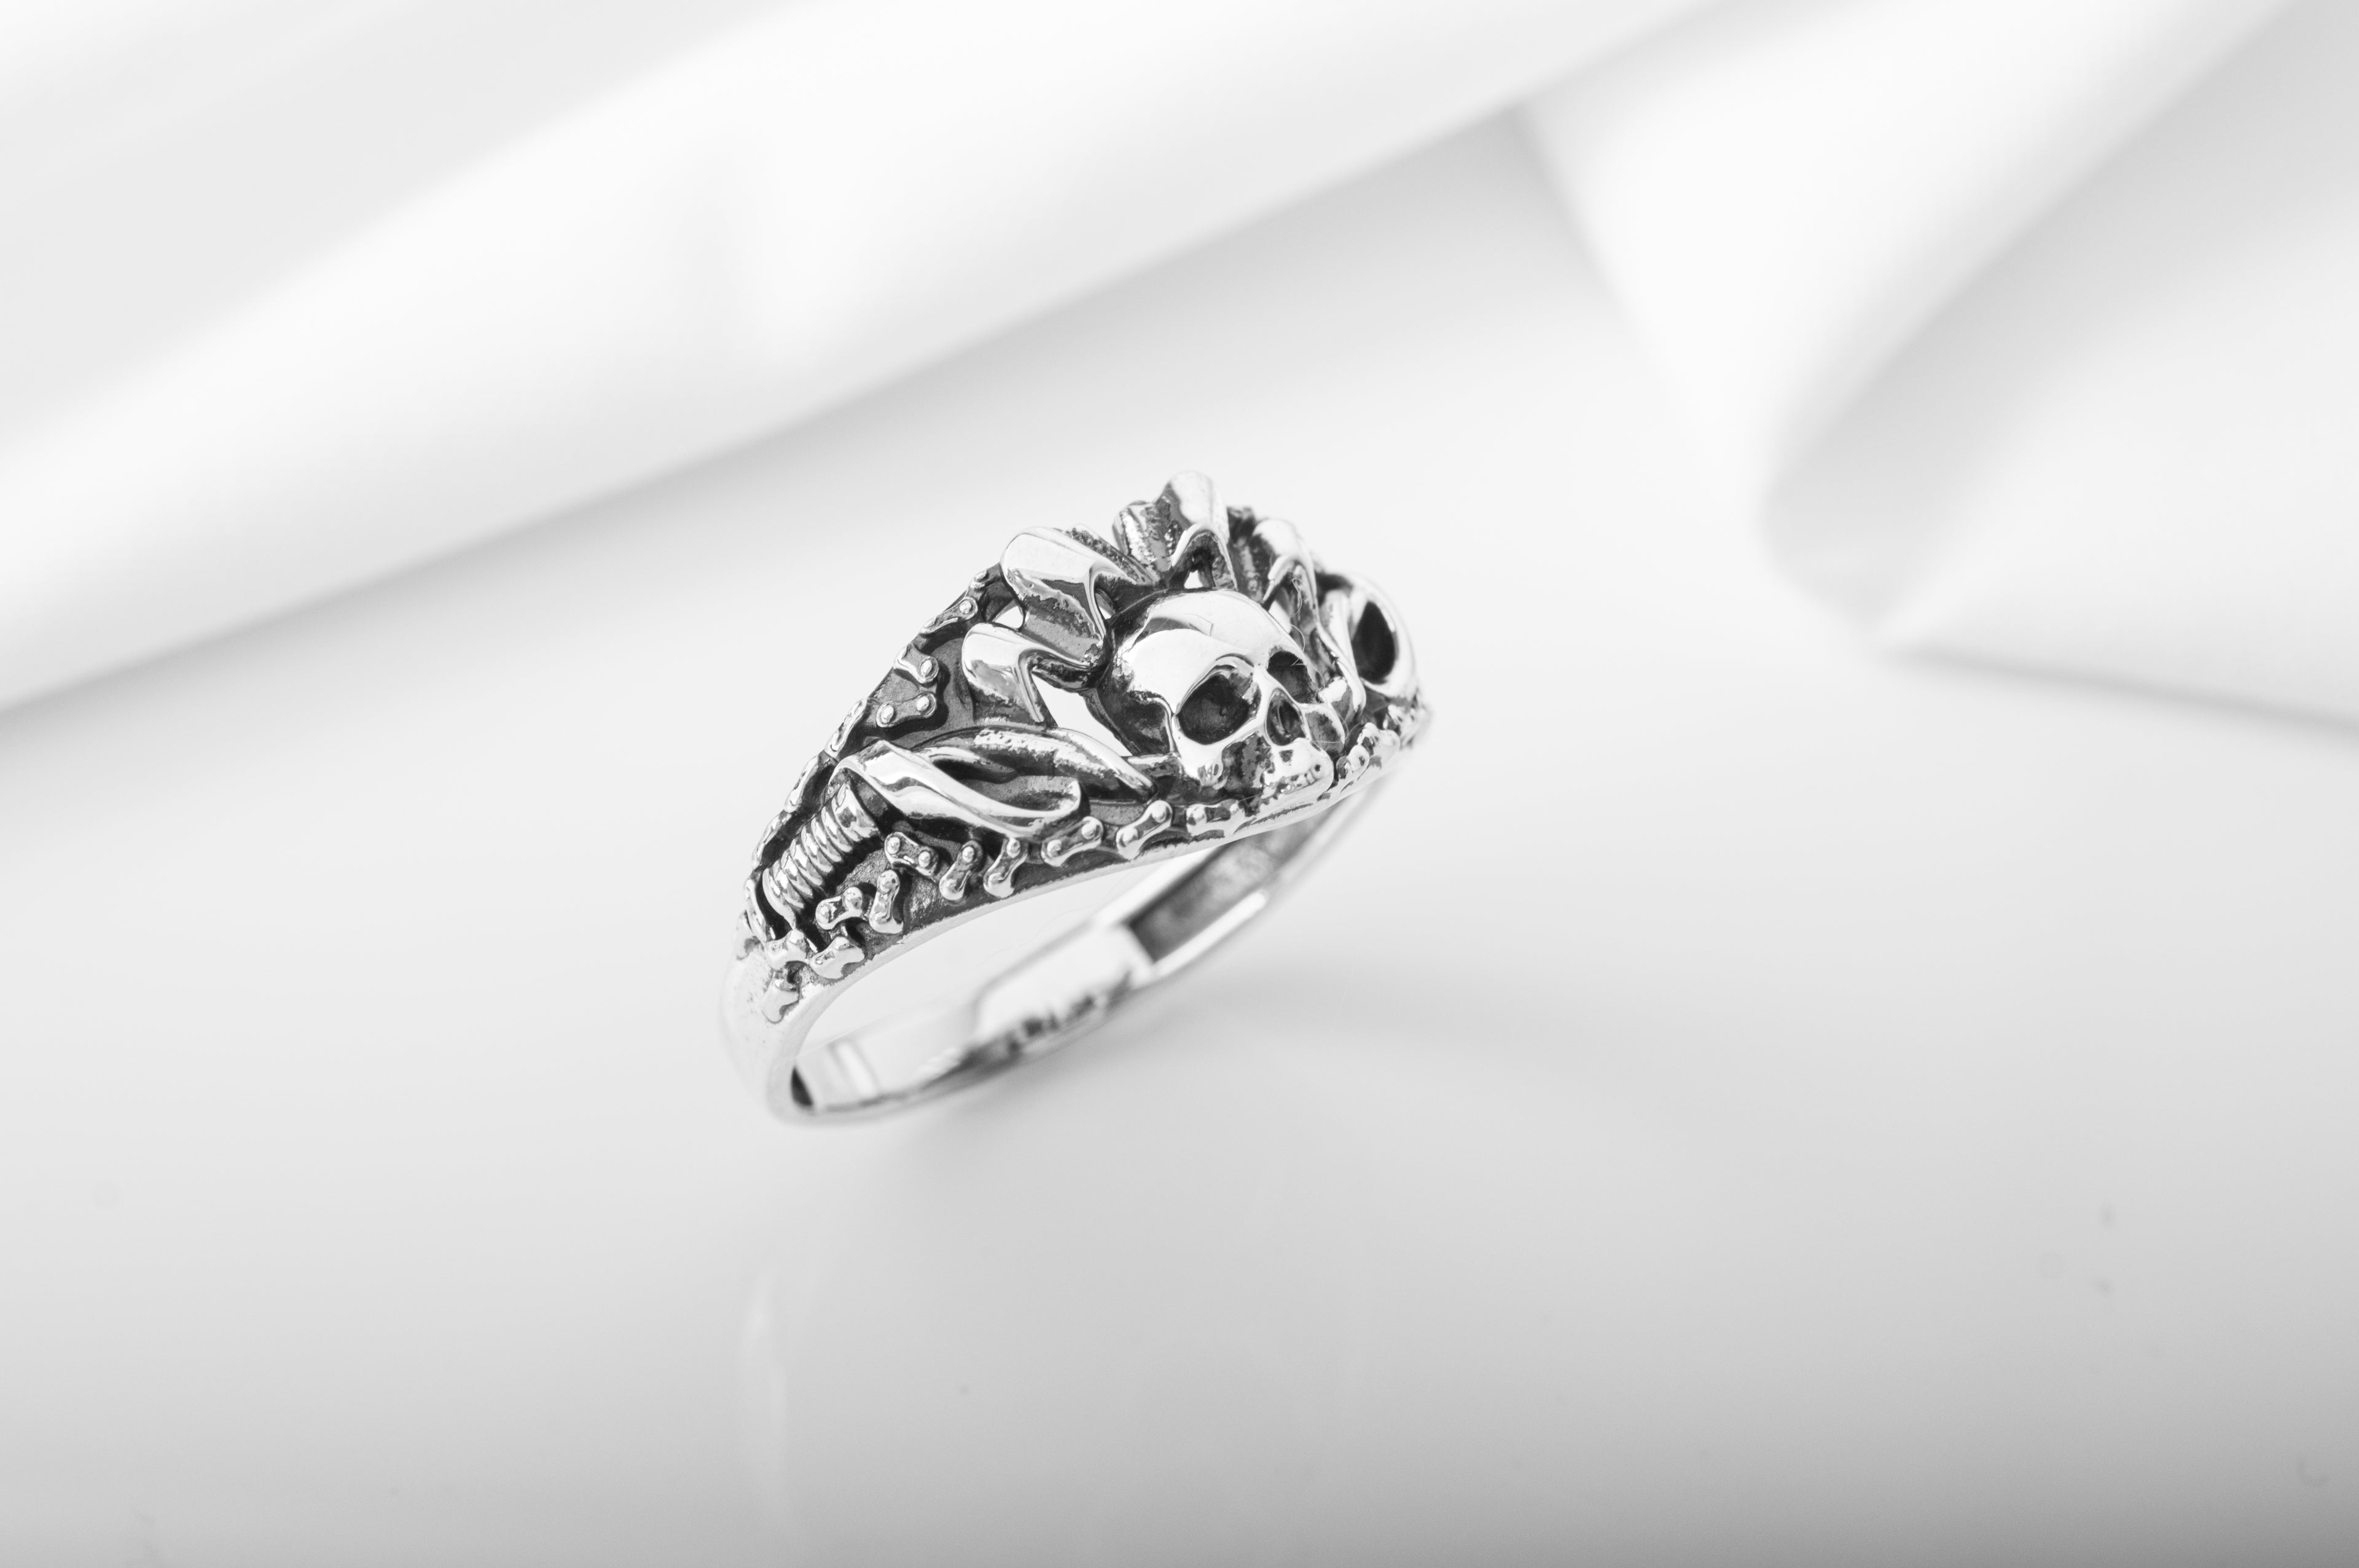 925 Silver Biker ring with Skull and Chain, Unique handmade jewelry - vikingworkshop